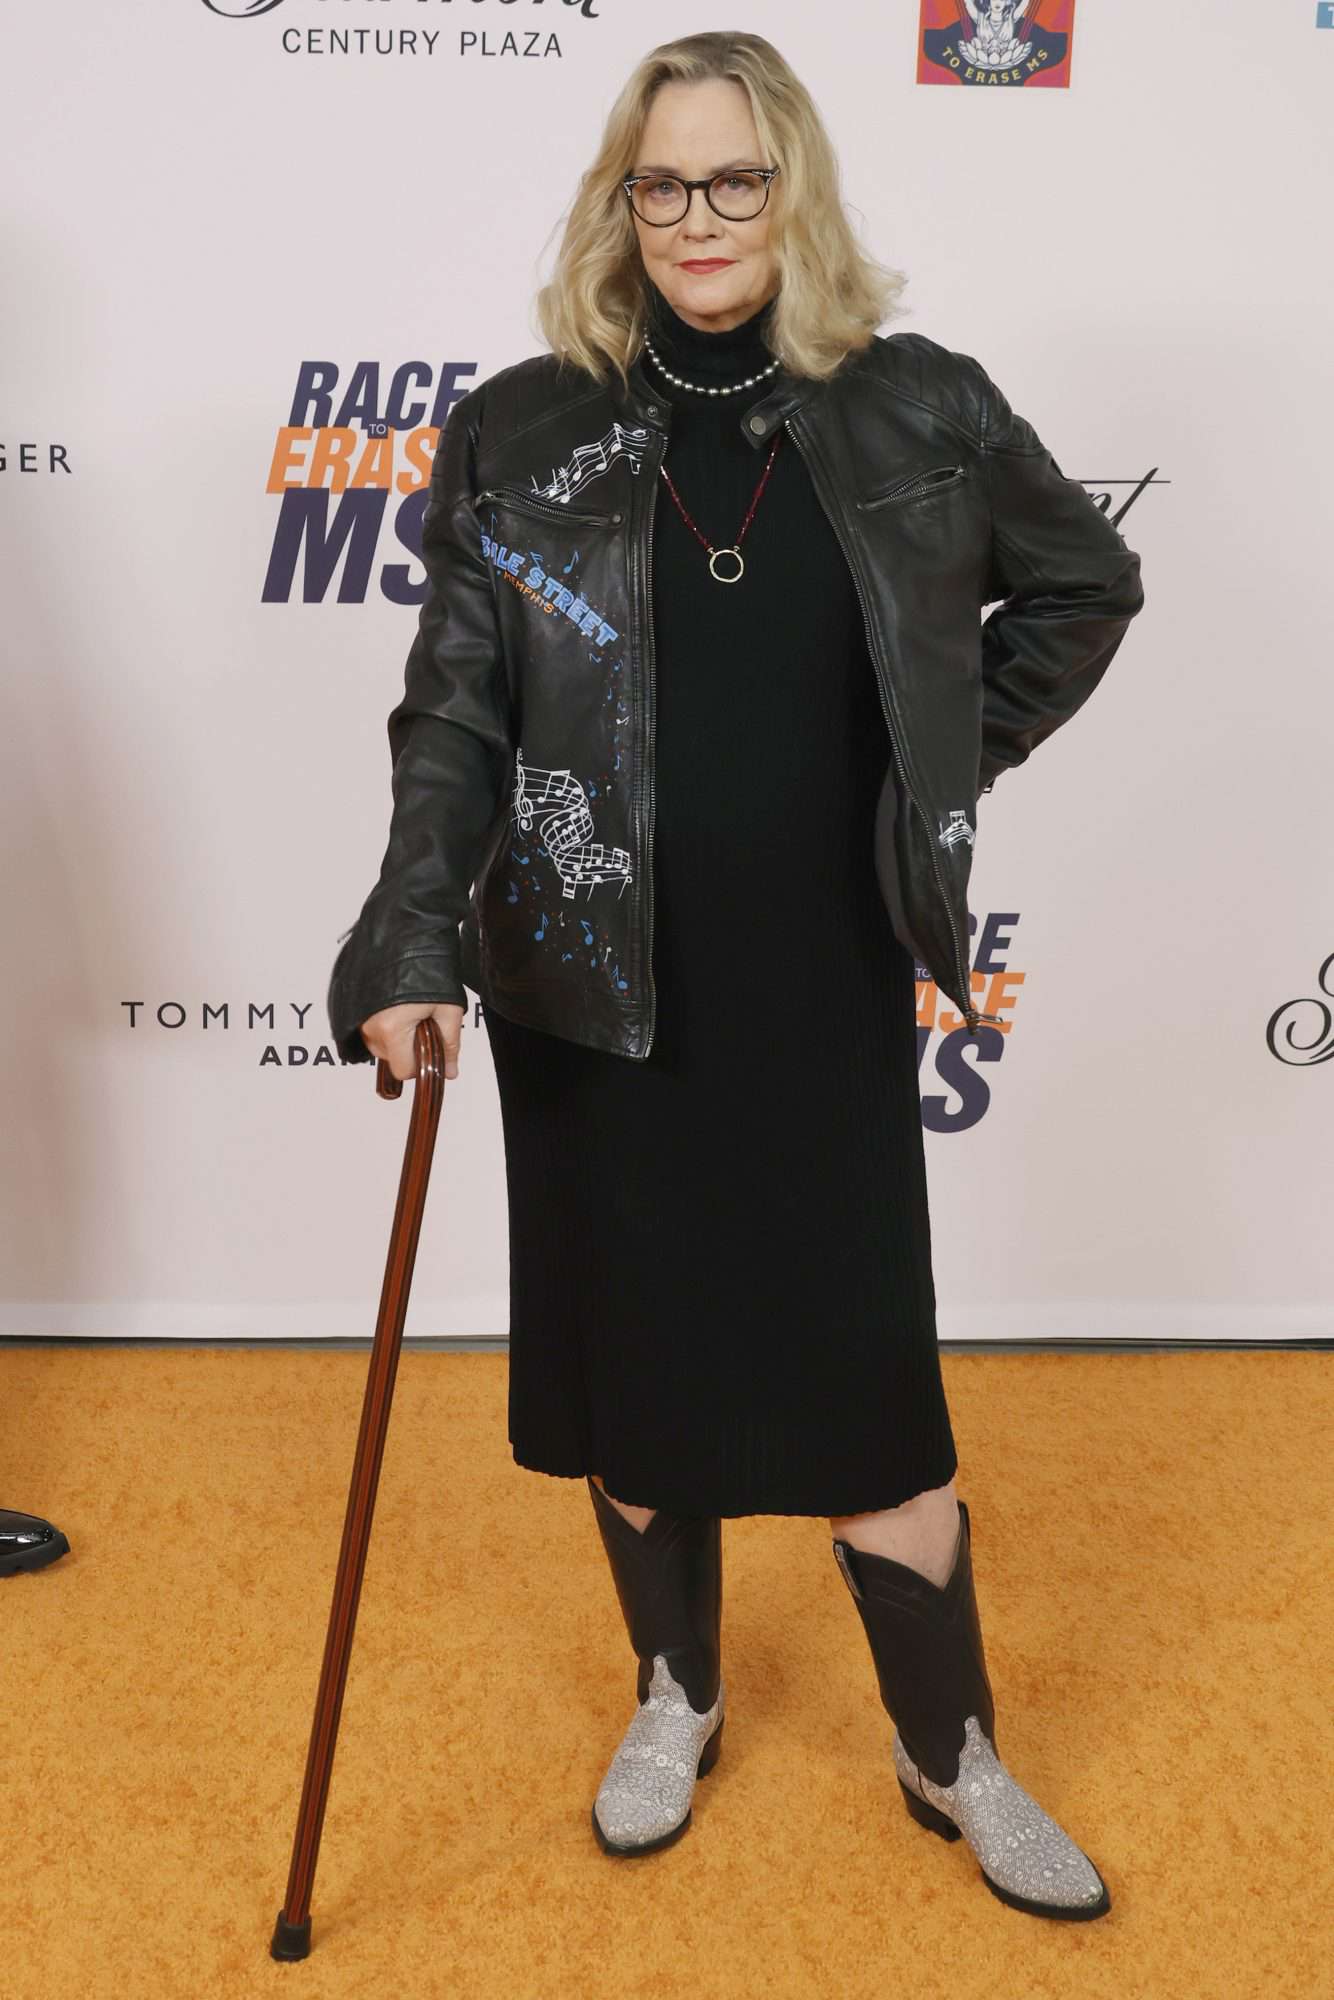 LOS ANGELES, CALIFORNIA - MAY 20: Cybill Shepherd attends the 29th Annual Race To Erase MS on May 20, 2022 in Los Angeles, California. (Photo by Frazer Harrison/Getty Images for Race to Erase MS)